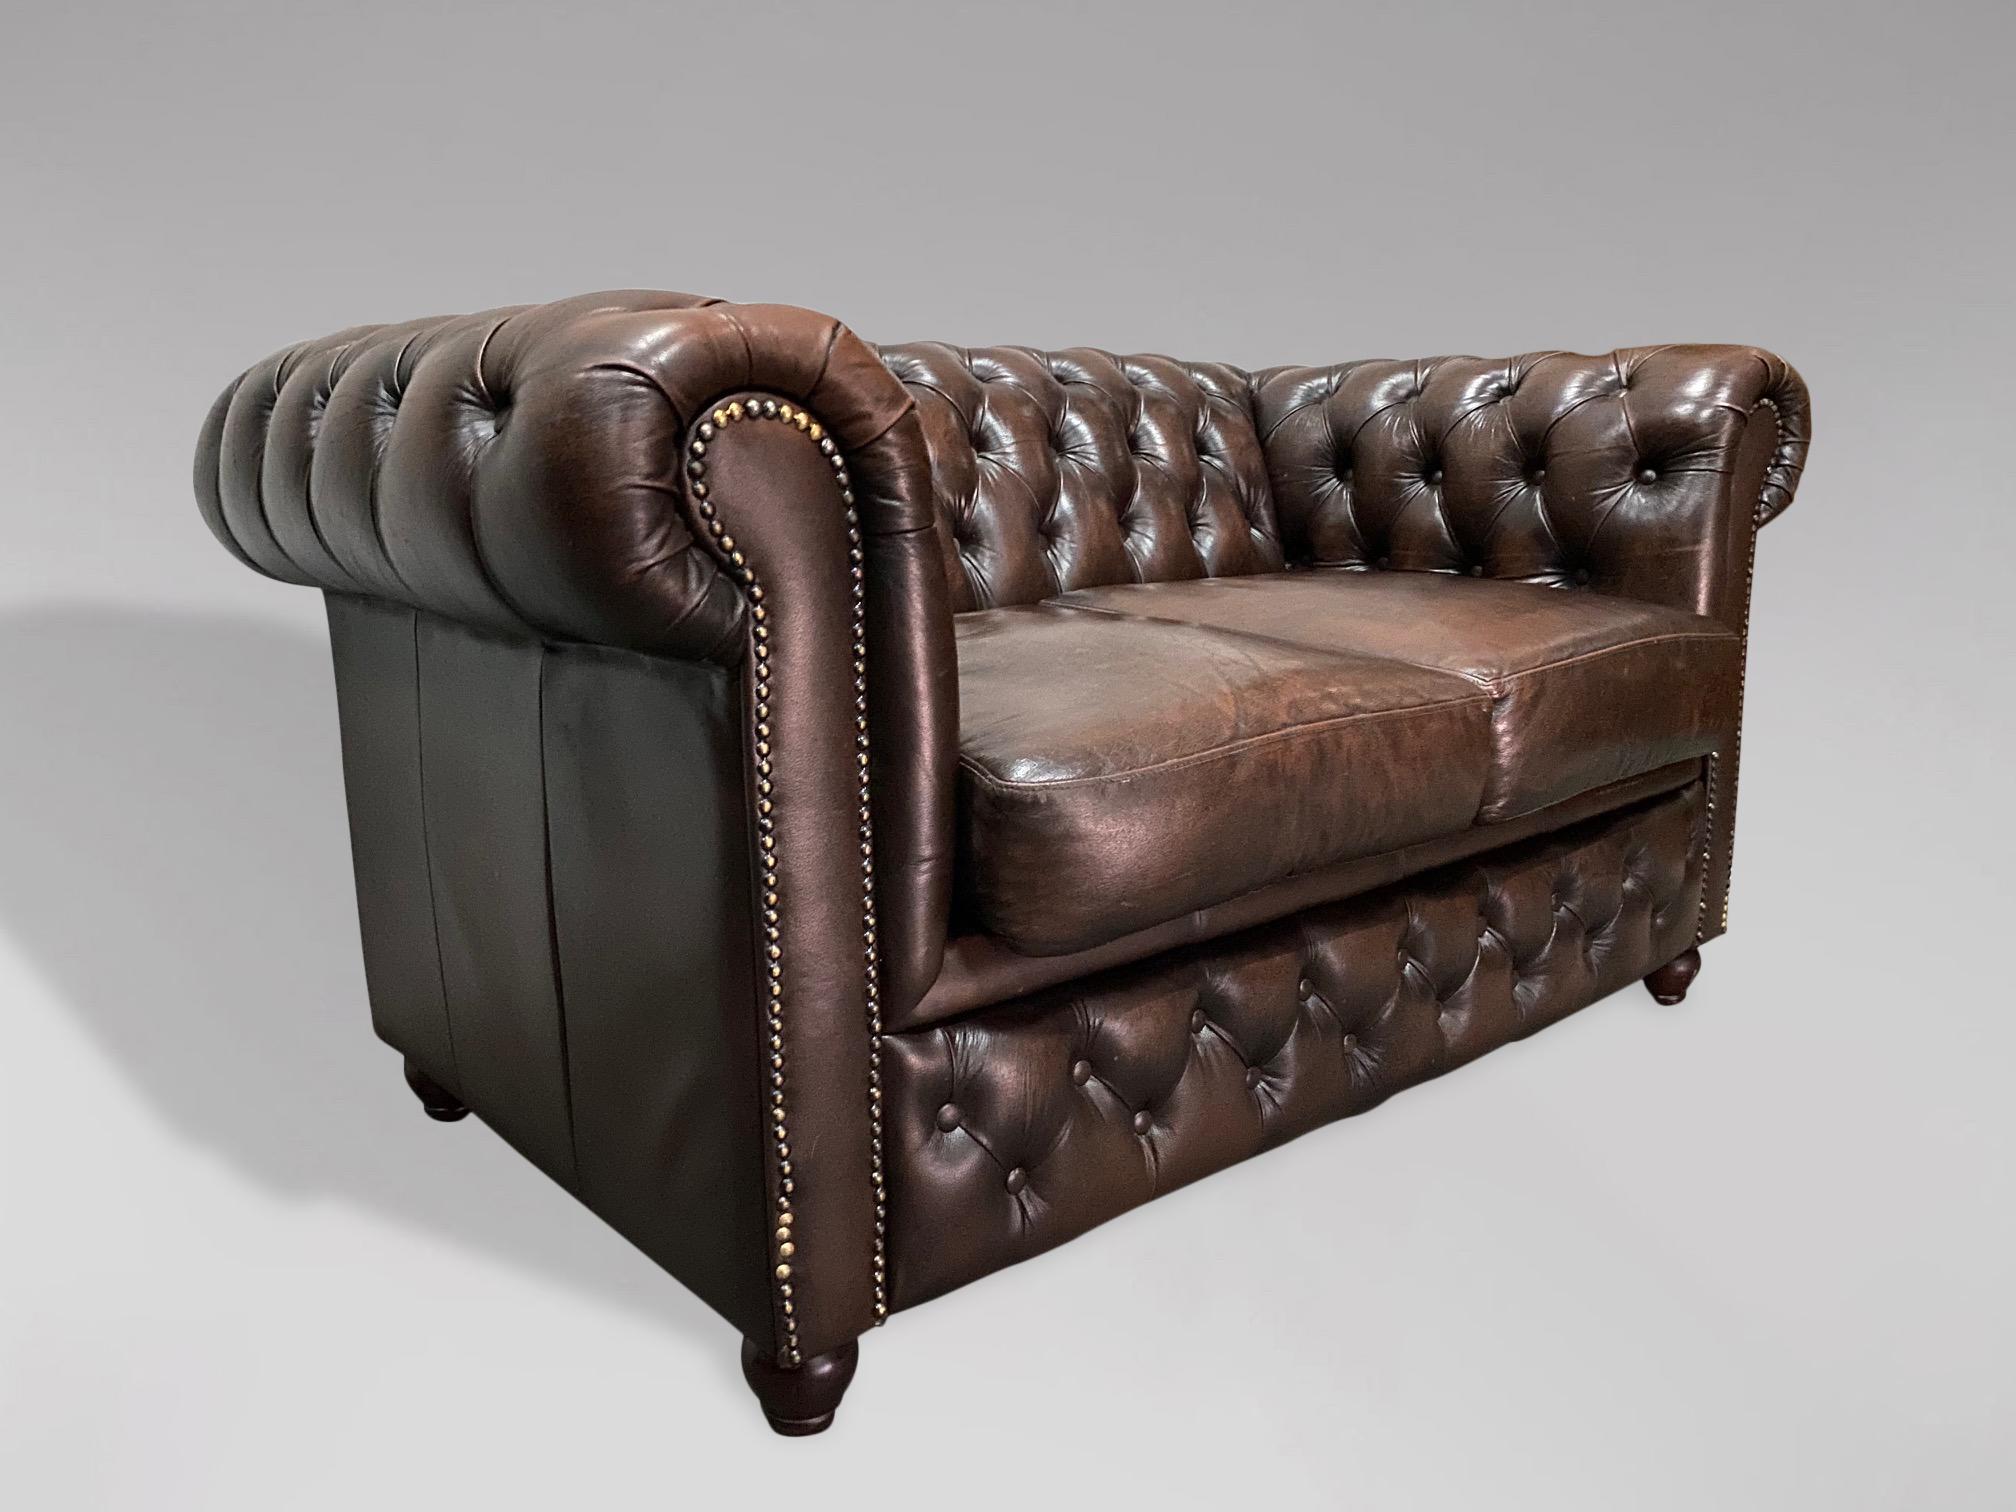 Hand-Crafted 20th Century Vintage Brown Leather 2 Seater Chesterfield Sofa